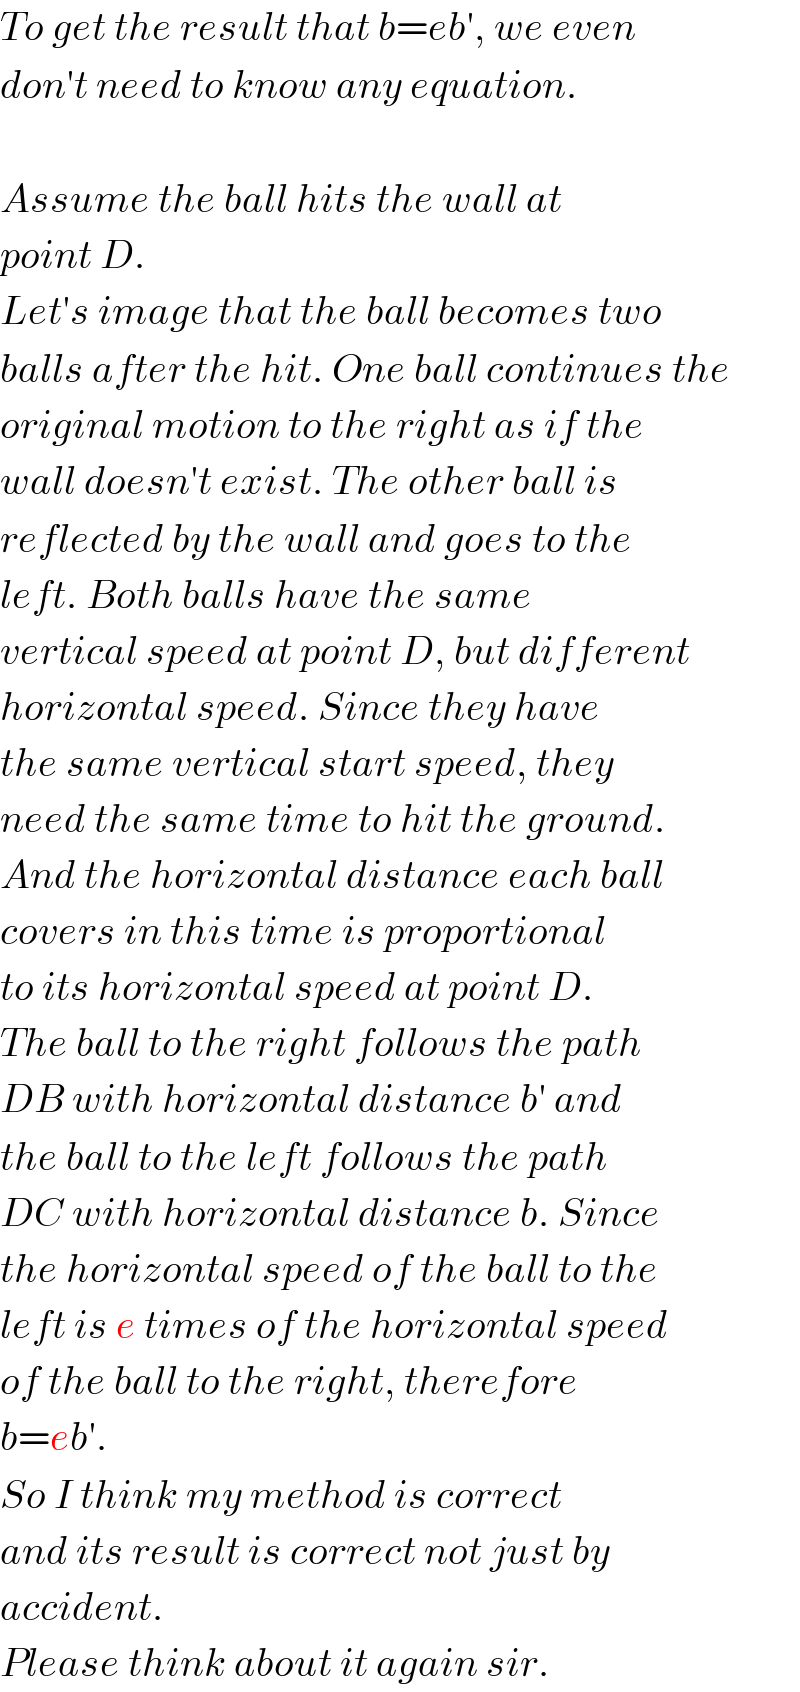 To get the result that b=eb′, we even  don′t need to know any equation.    Assume the ball hits the wall at  point D.  Let′s image that the ball becomes two  balls after the hit. One ball continues the  original motion to the right as if the  wall doesn′t exist. The other ball is  reflected by the wall and goes to the  left. Both balls have the same   vertical speed at point D, but different   horizontal speed. Since they have  the same vertical start speed, they  need the same time to hit the ground.  And the horizontal distance each ball   covers in this time is proportional  to its horizontal speed at point D.  The ball to the right follows the path  DB with horizontal distance b′ and  the ball to the left follows the path  DC with horizontal distance b. Since  the horizontal speed of the ball to the  left is e times of the horizontal speed  of the ball to the right, therefore  b=eb′.  So I think my method is correct  and its result is correct not just by  accident.  Please think about it again sir.  